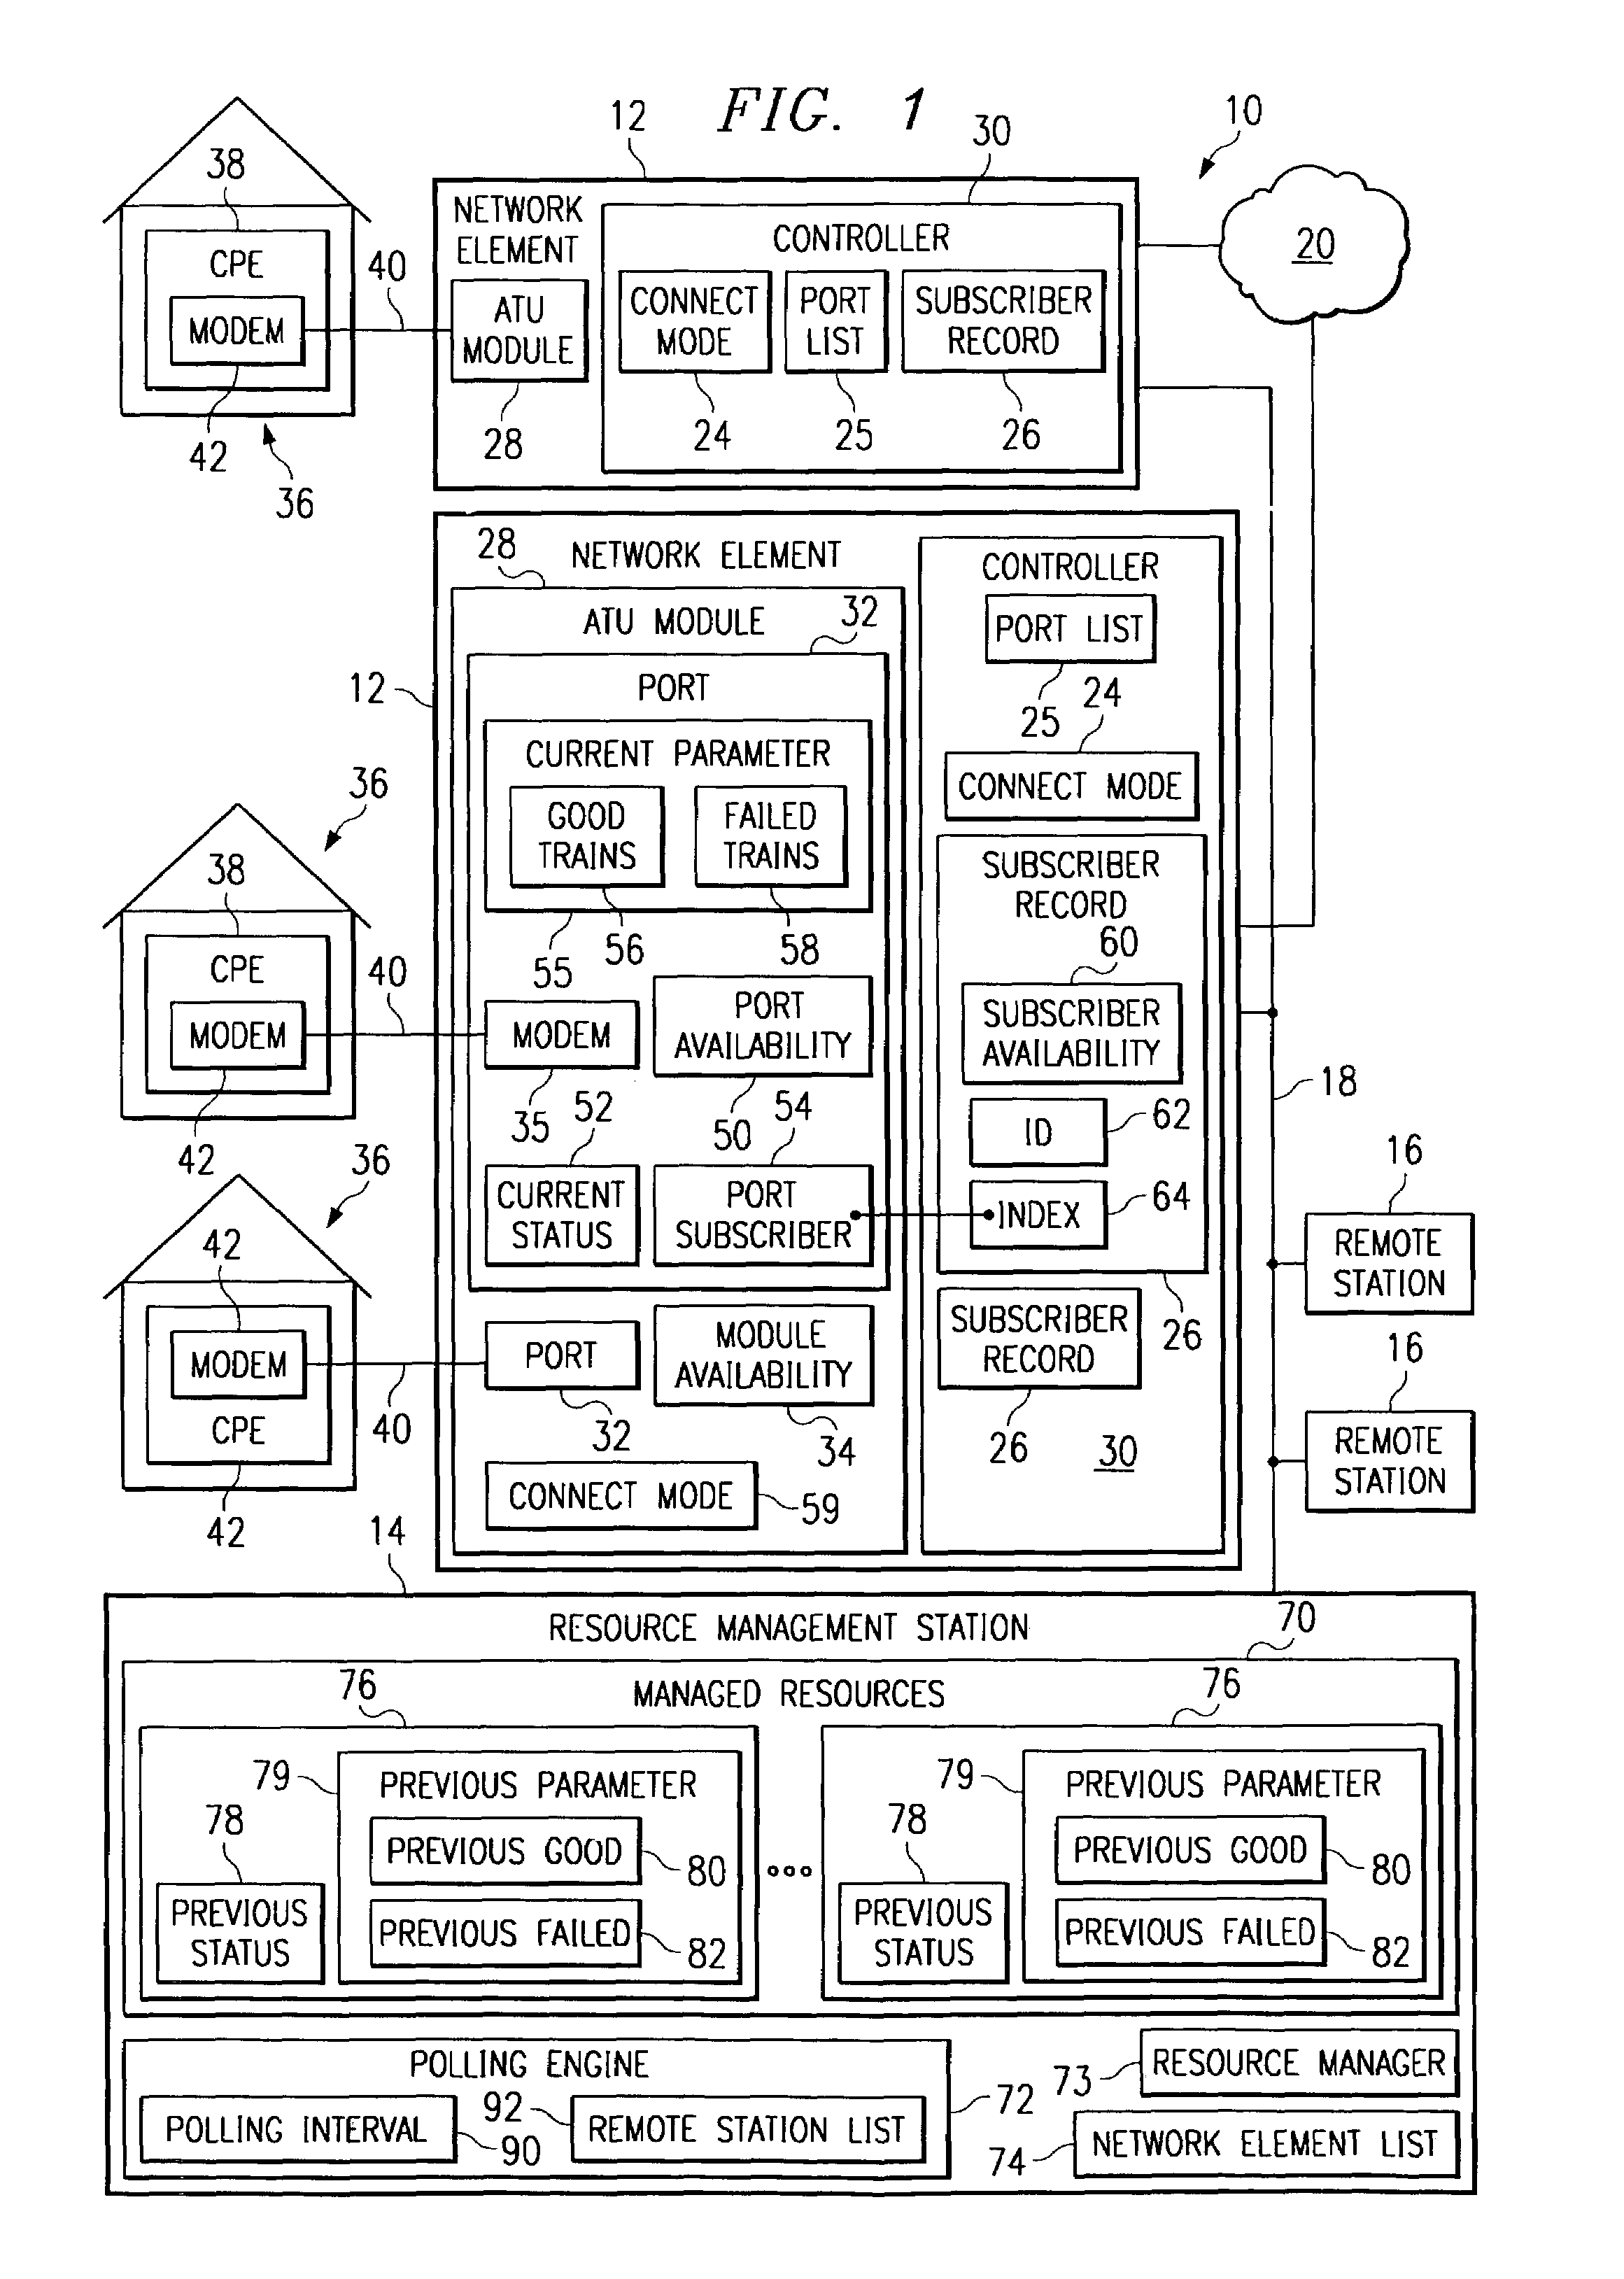 Method and system for managing remote resources in a telecommunications system